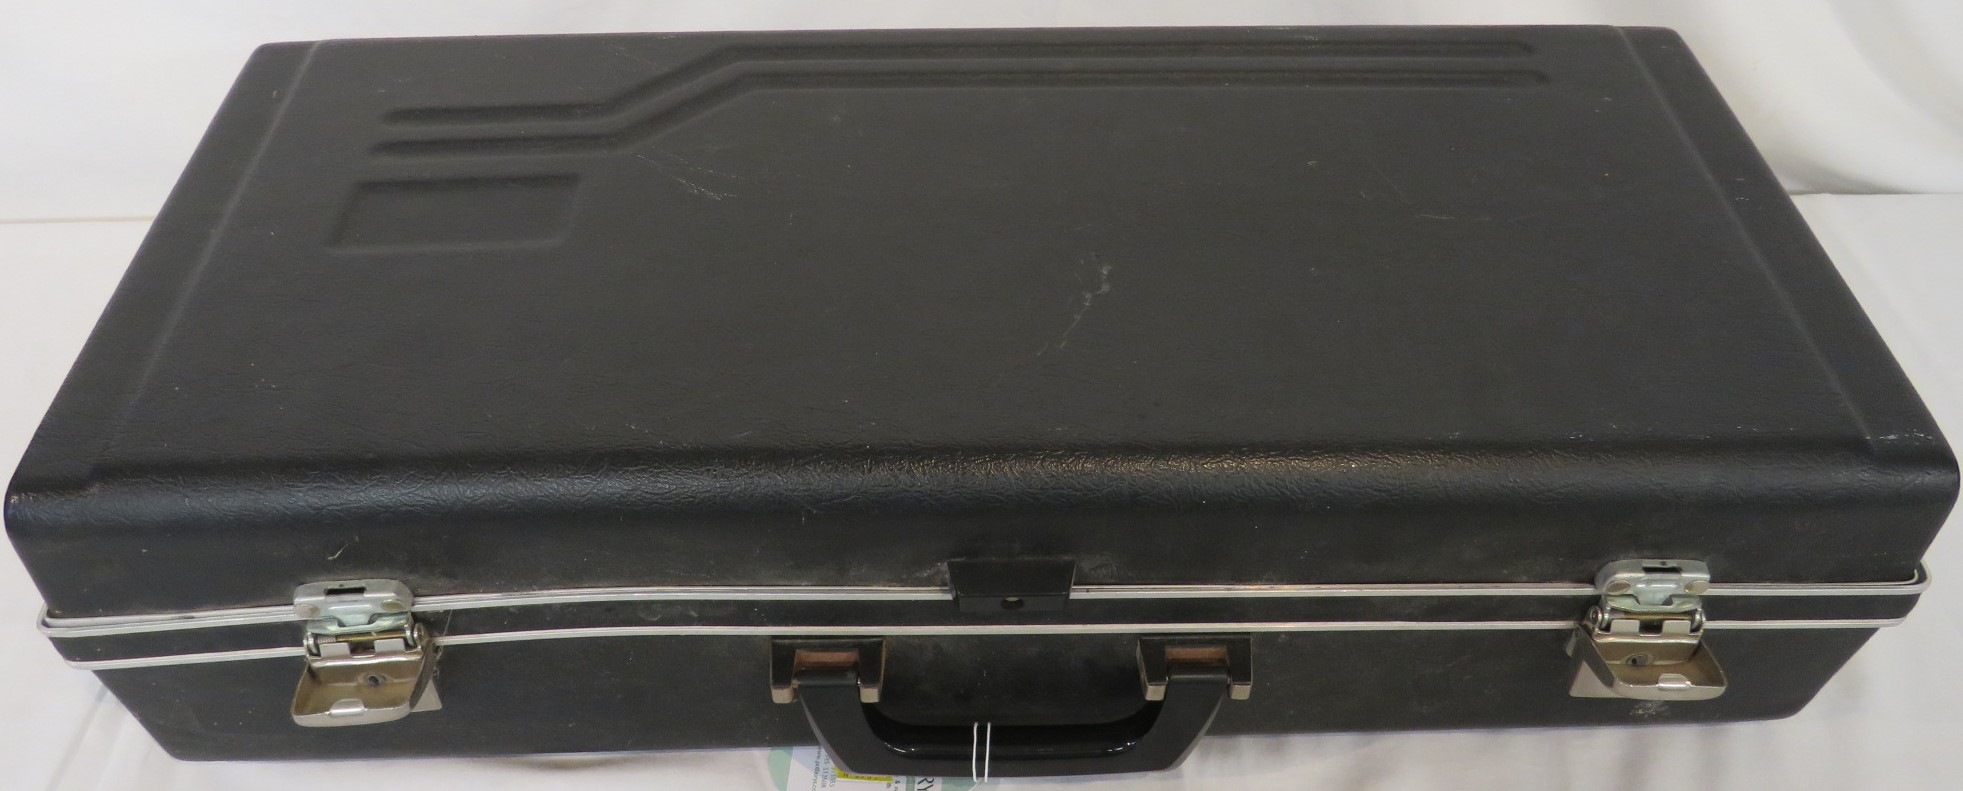 B & H 400 for Boosey & Hawkes Alto saxophone in hard carry case - Image 12 of 14